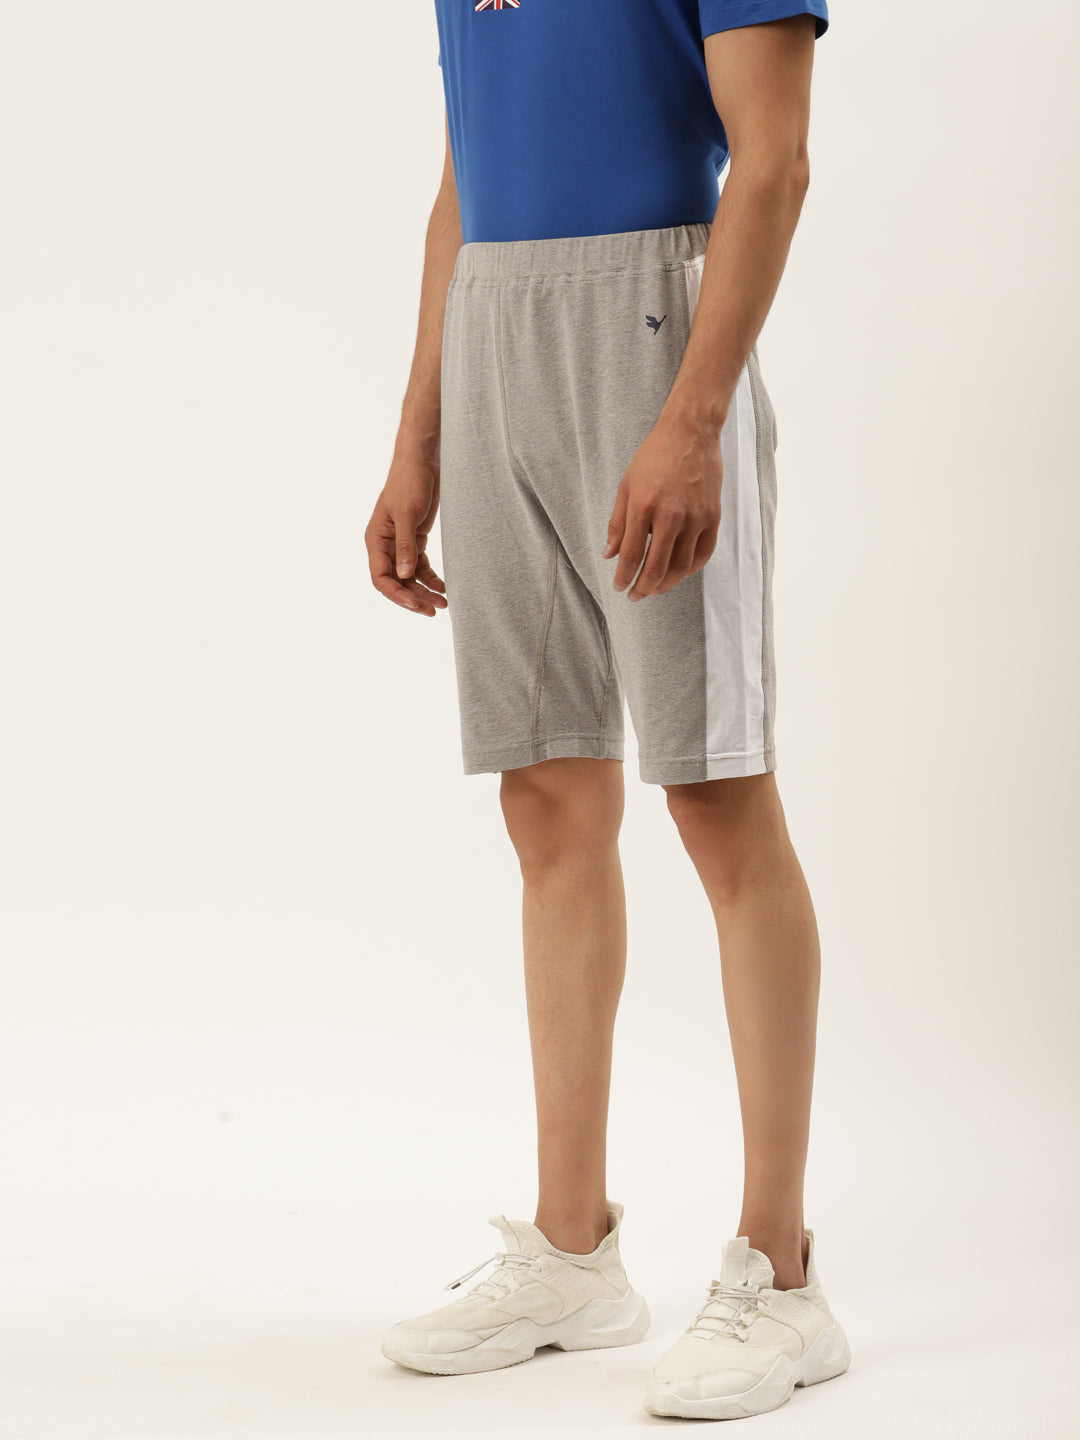 MENS COTTON RICH LYCRA WITH CONTRAST TAPE SHORTS